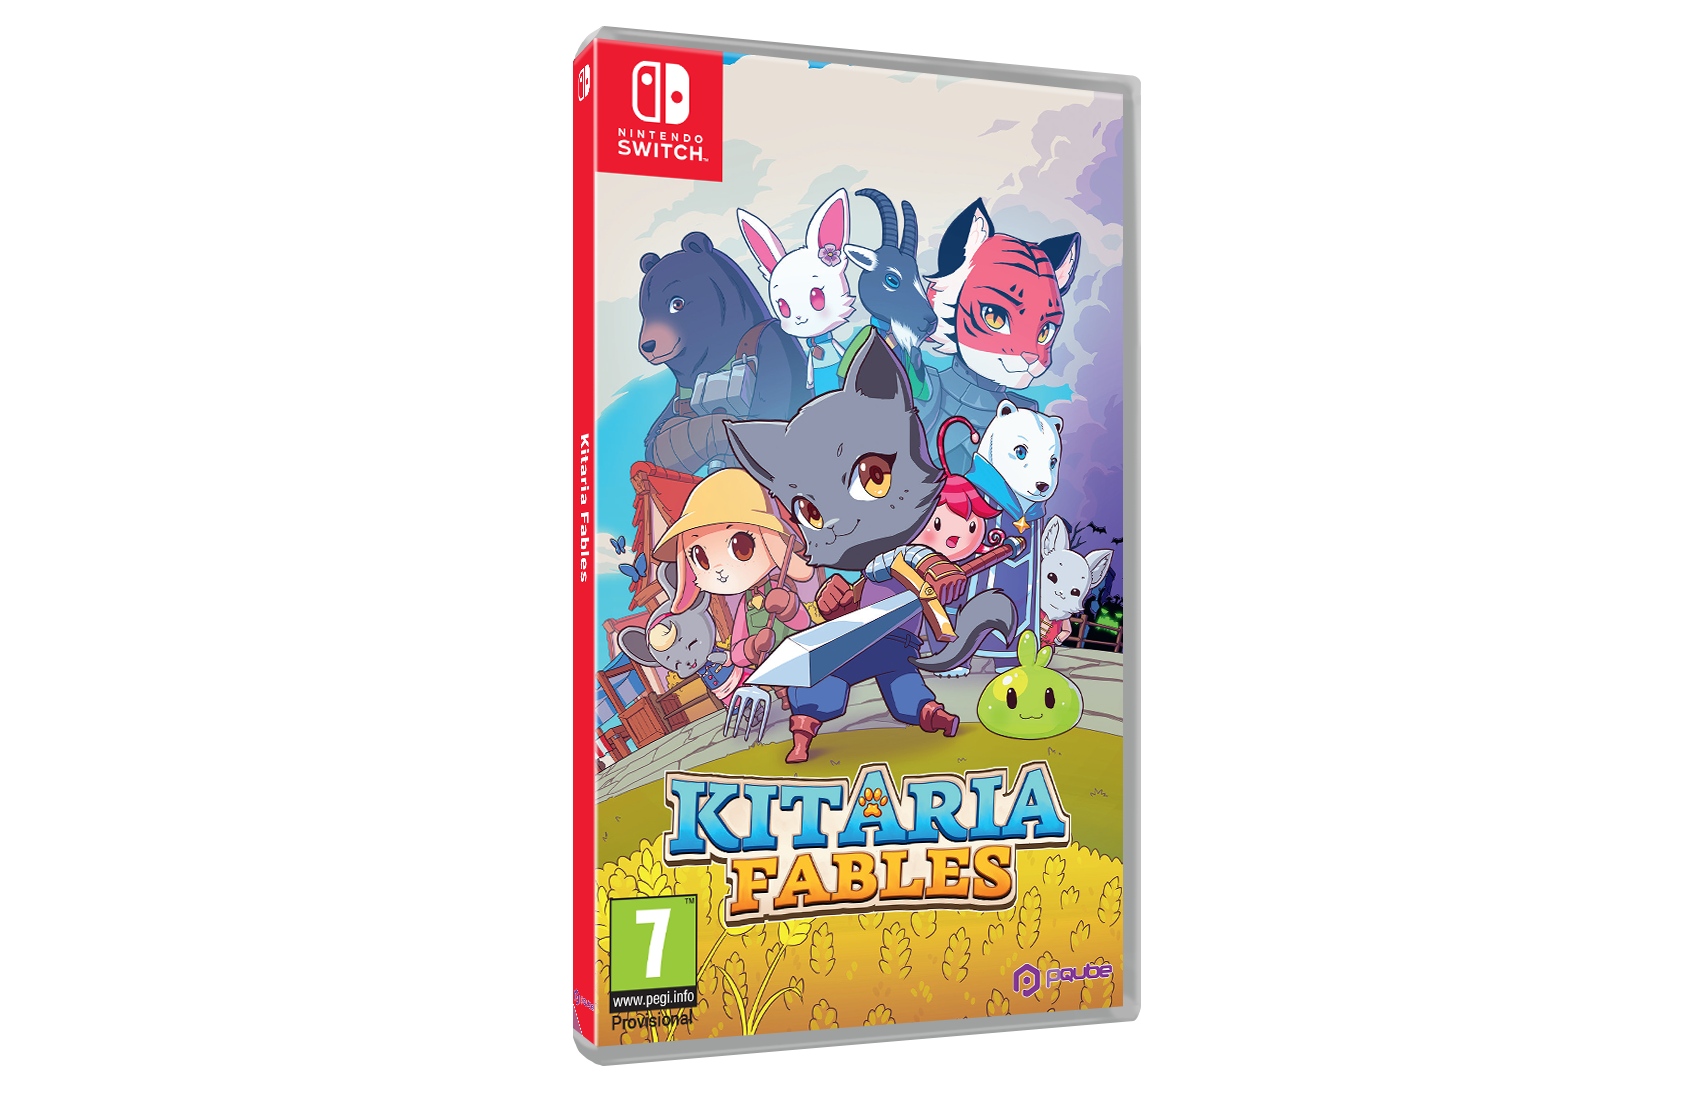 Kitaria Fables launches for Switch in September